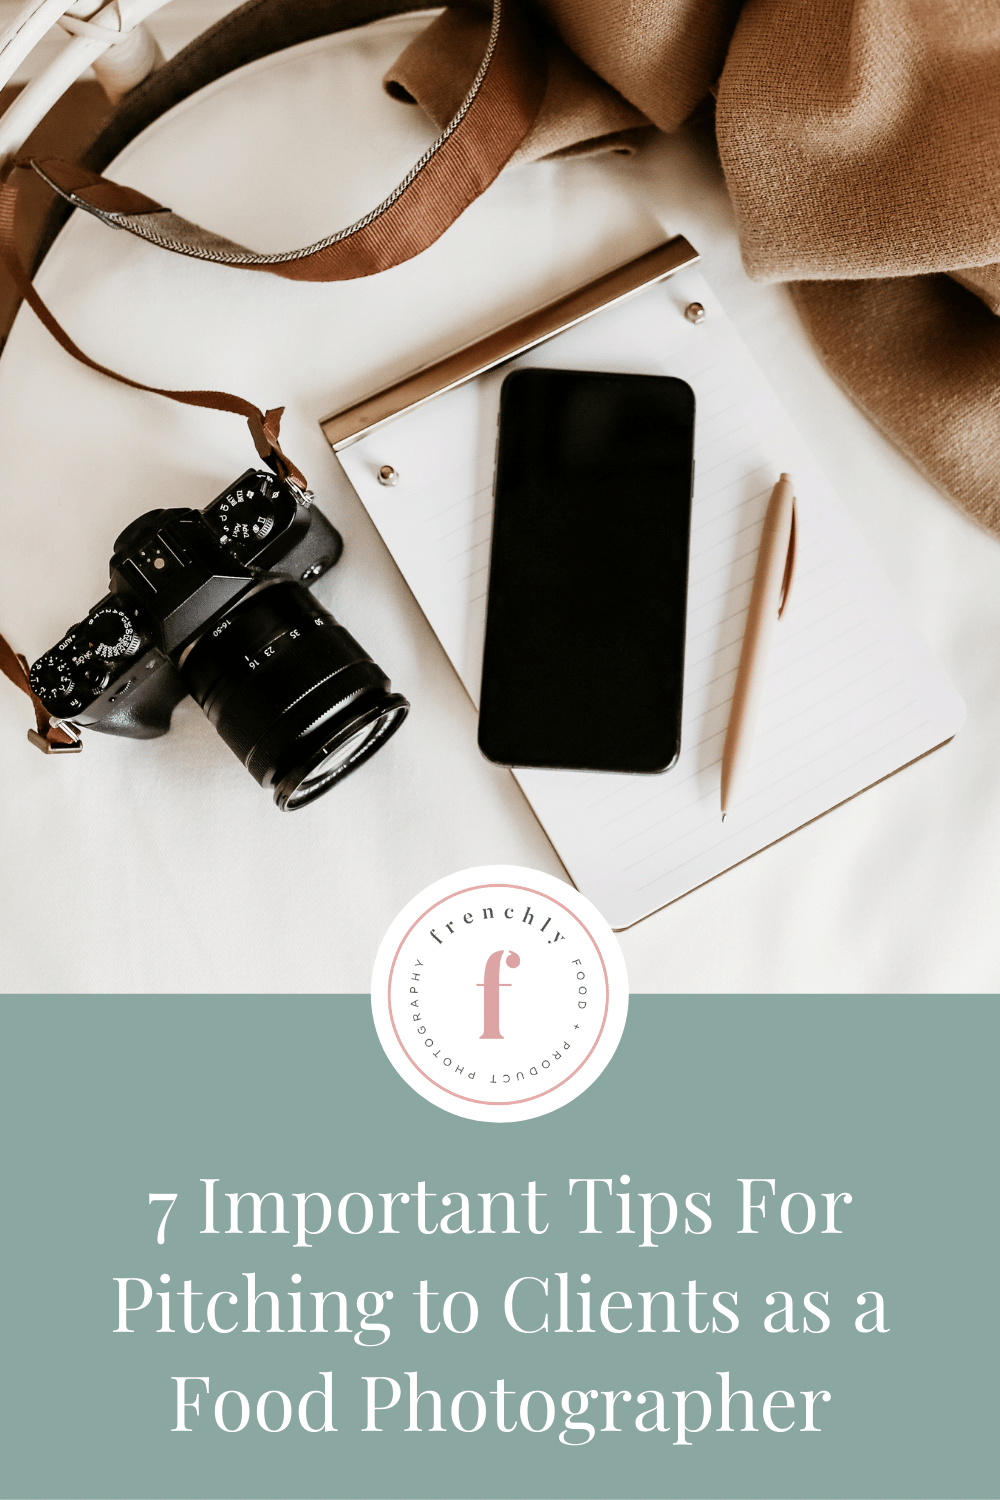 7 Important Tips For Pitching to Clients as a Food Photographer | Frenchly Food + Product Photography